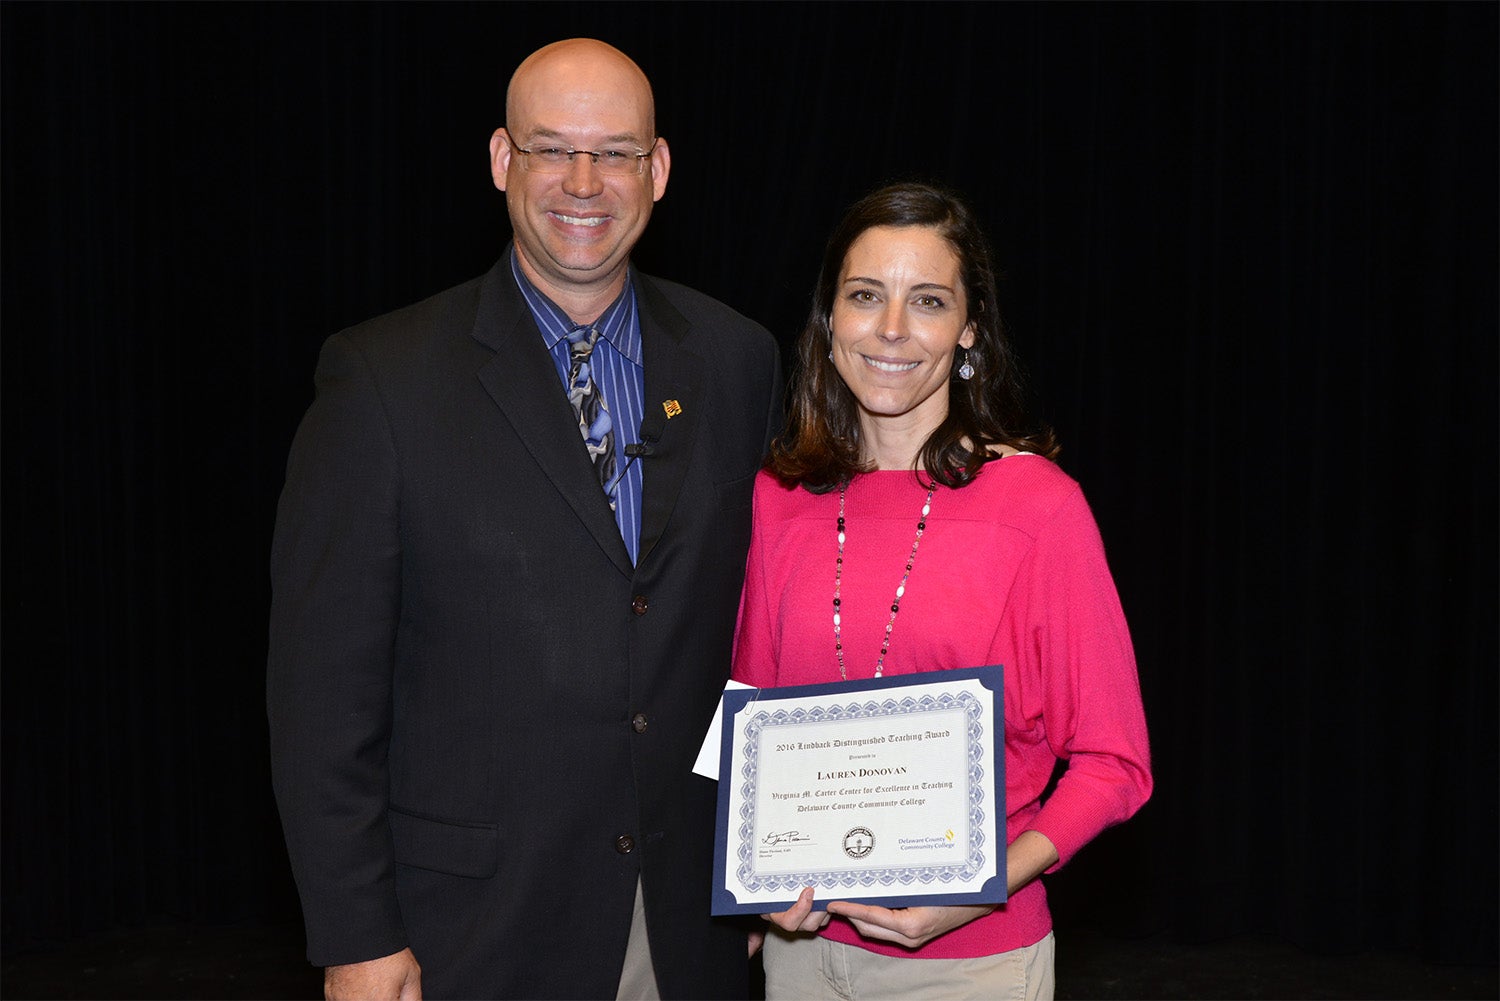 Lauren Donovan, Assistant Professor of Business at Delaware County Community College, receives the Lindback Award for Distinguished Teaching from Provost Dr. Eric Wellington